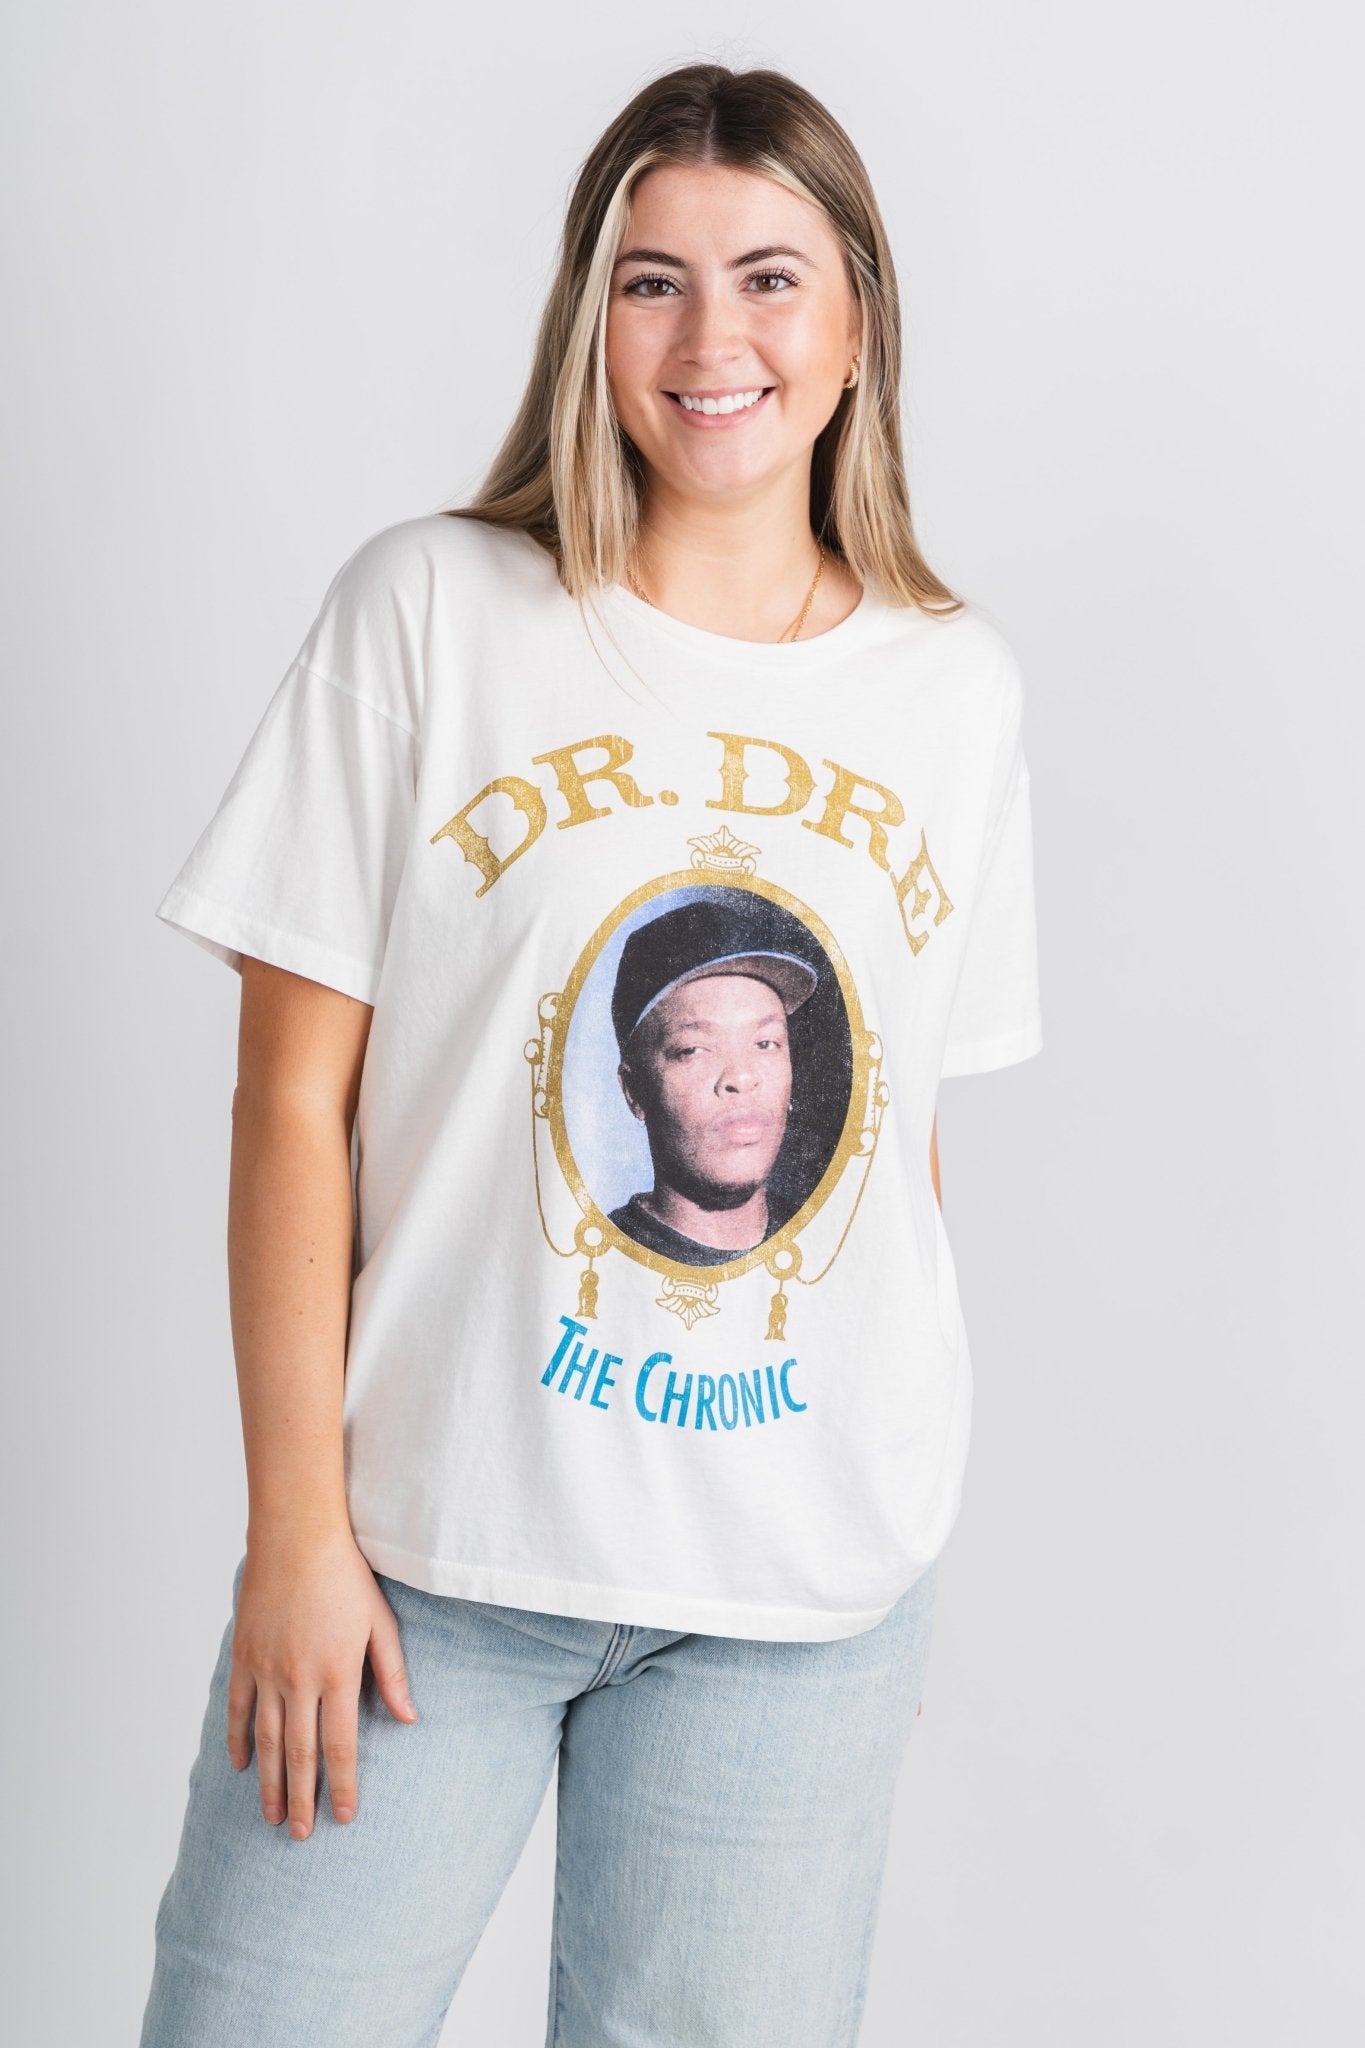 DayDreamer Dr. Dre the chronic merch t-shirt vintage white - DayDreamer Rock T-Shirts at Lush Fashion Lounge Trendy Boutique in Oklahoma City